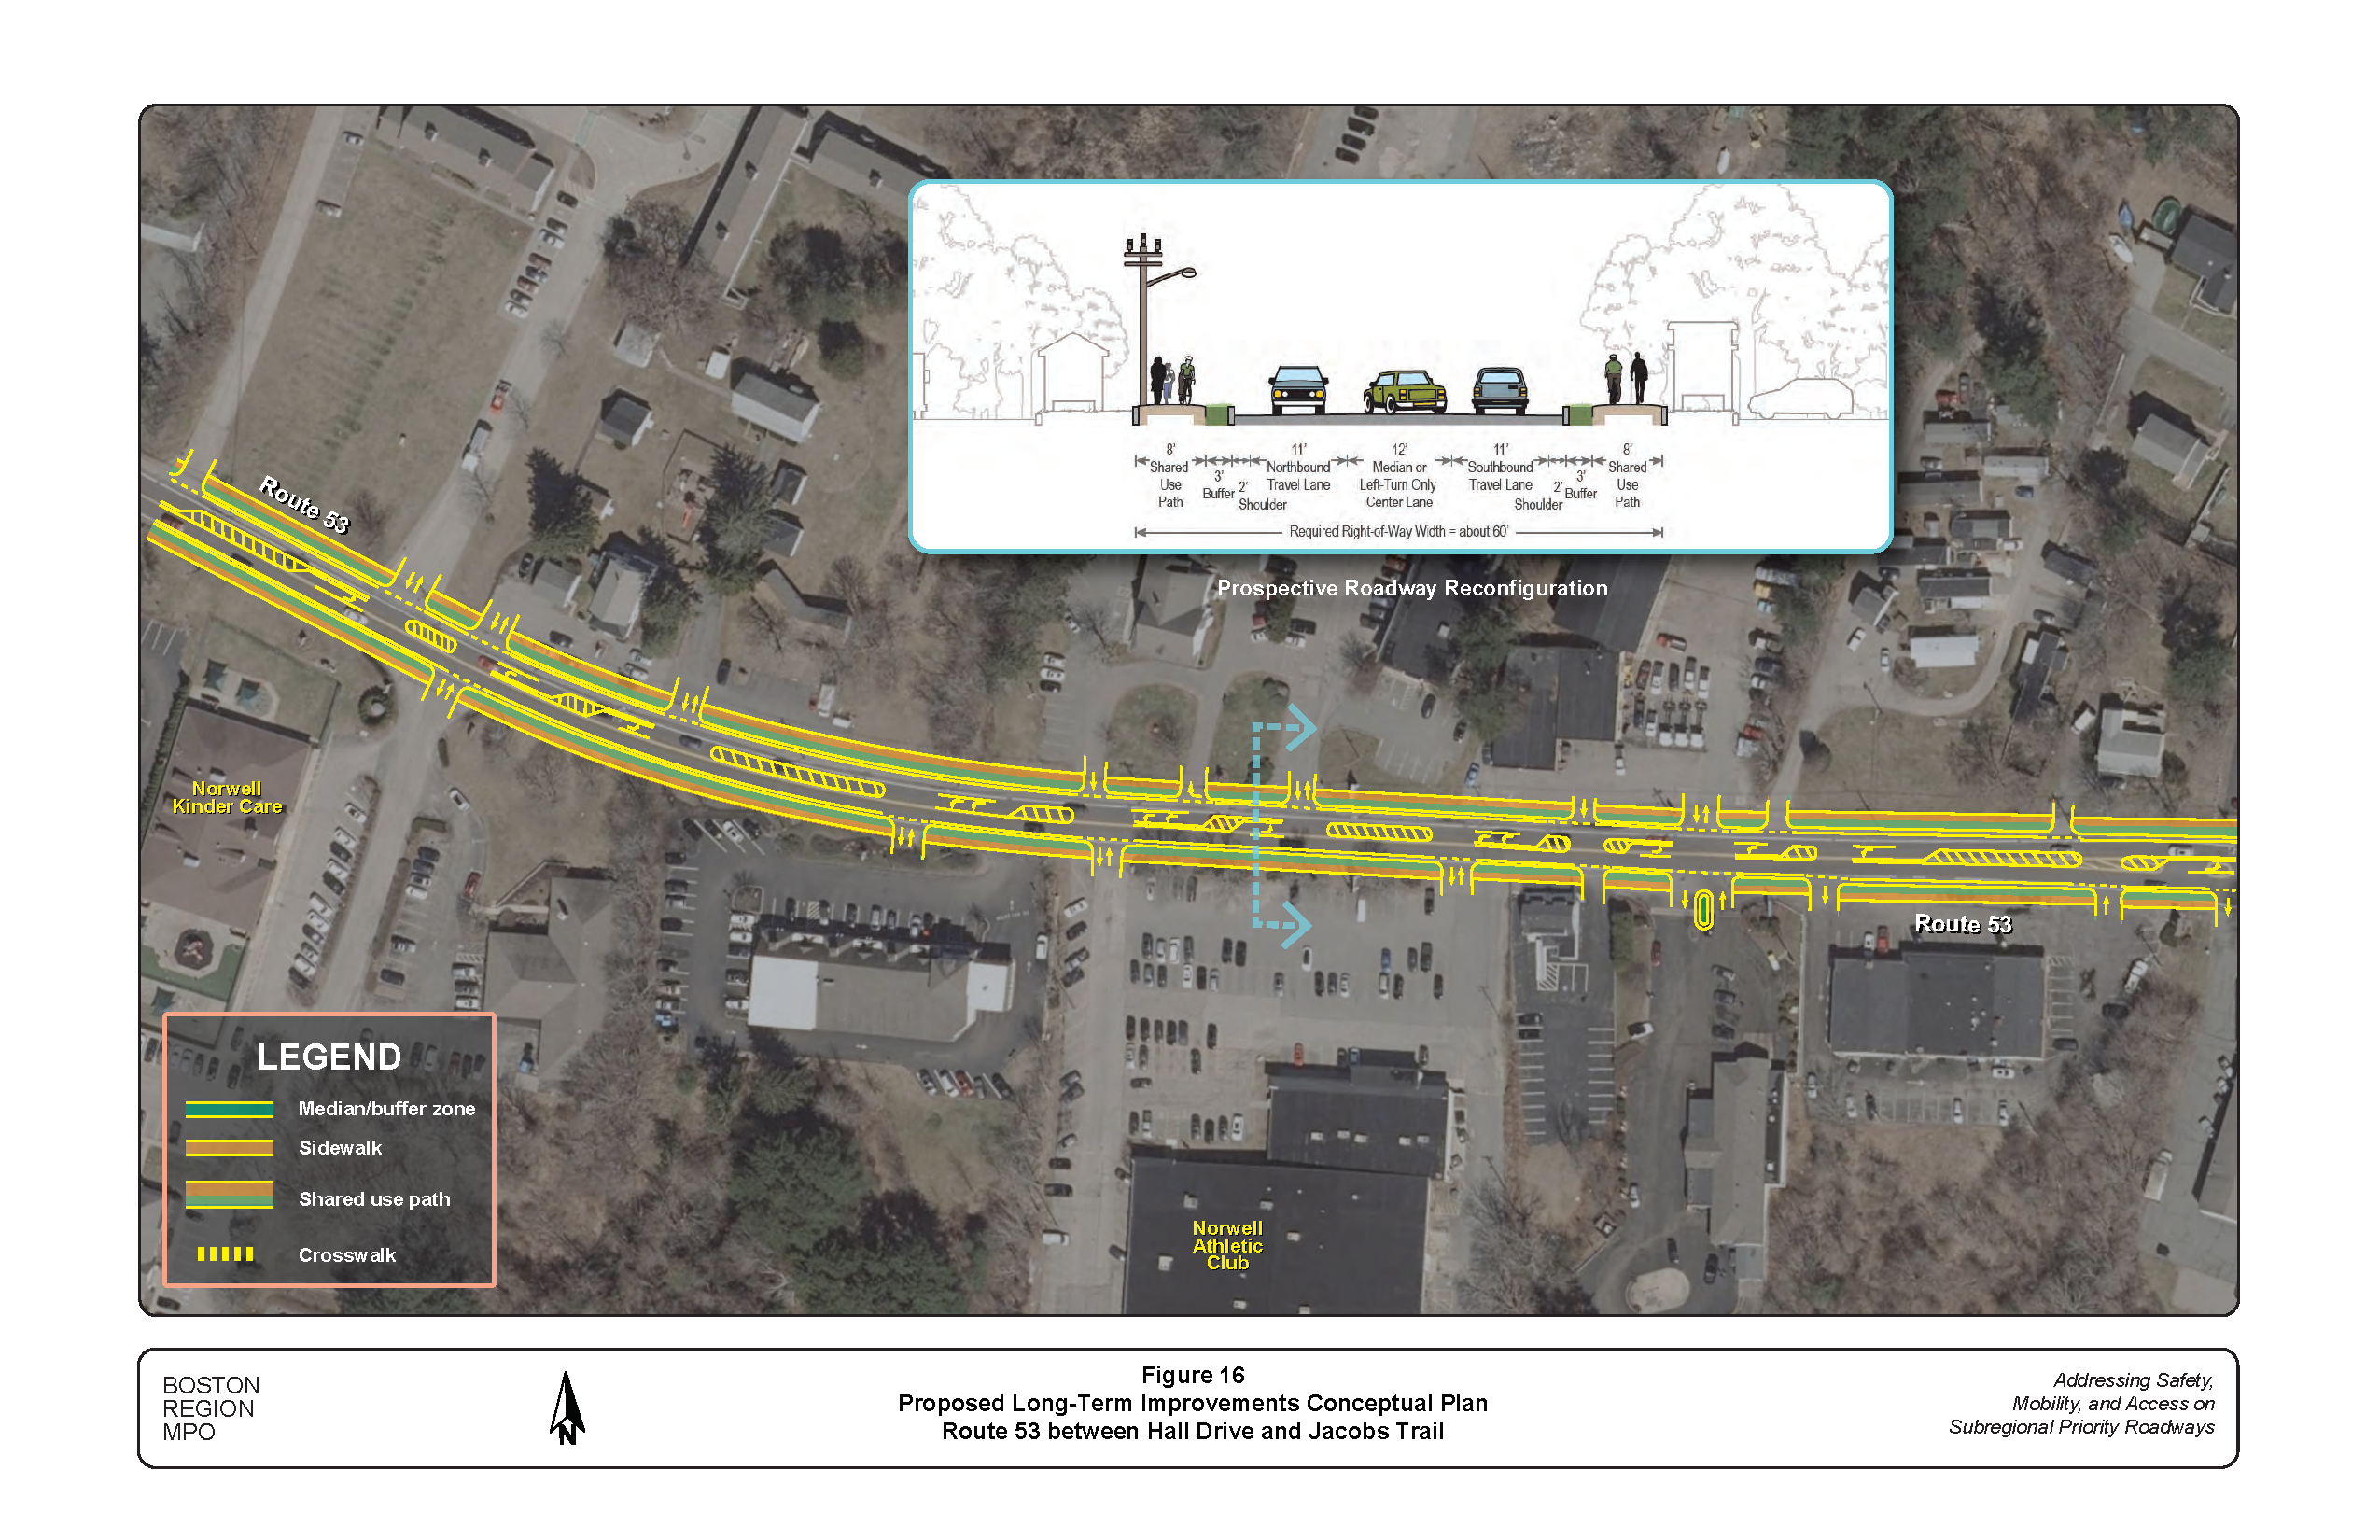 This figure shows a conceptual plan of the proposed long-term improvements in the Route 53 section from Hall Drive to Jacobs Trial.